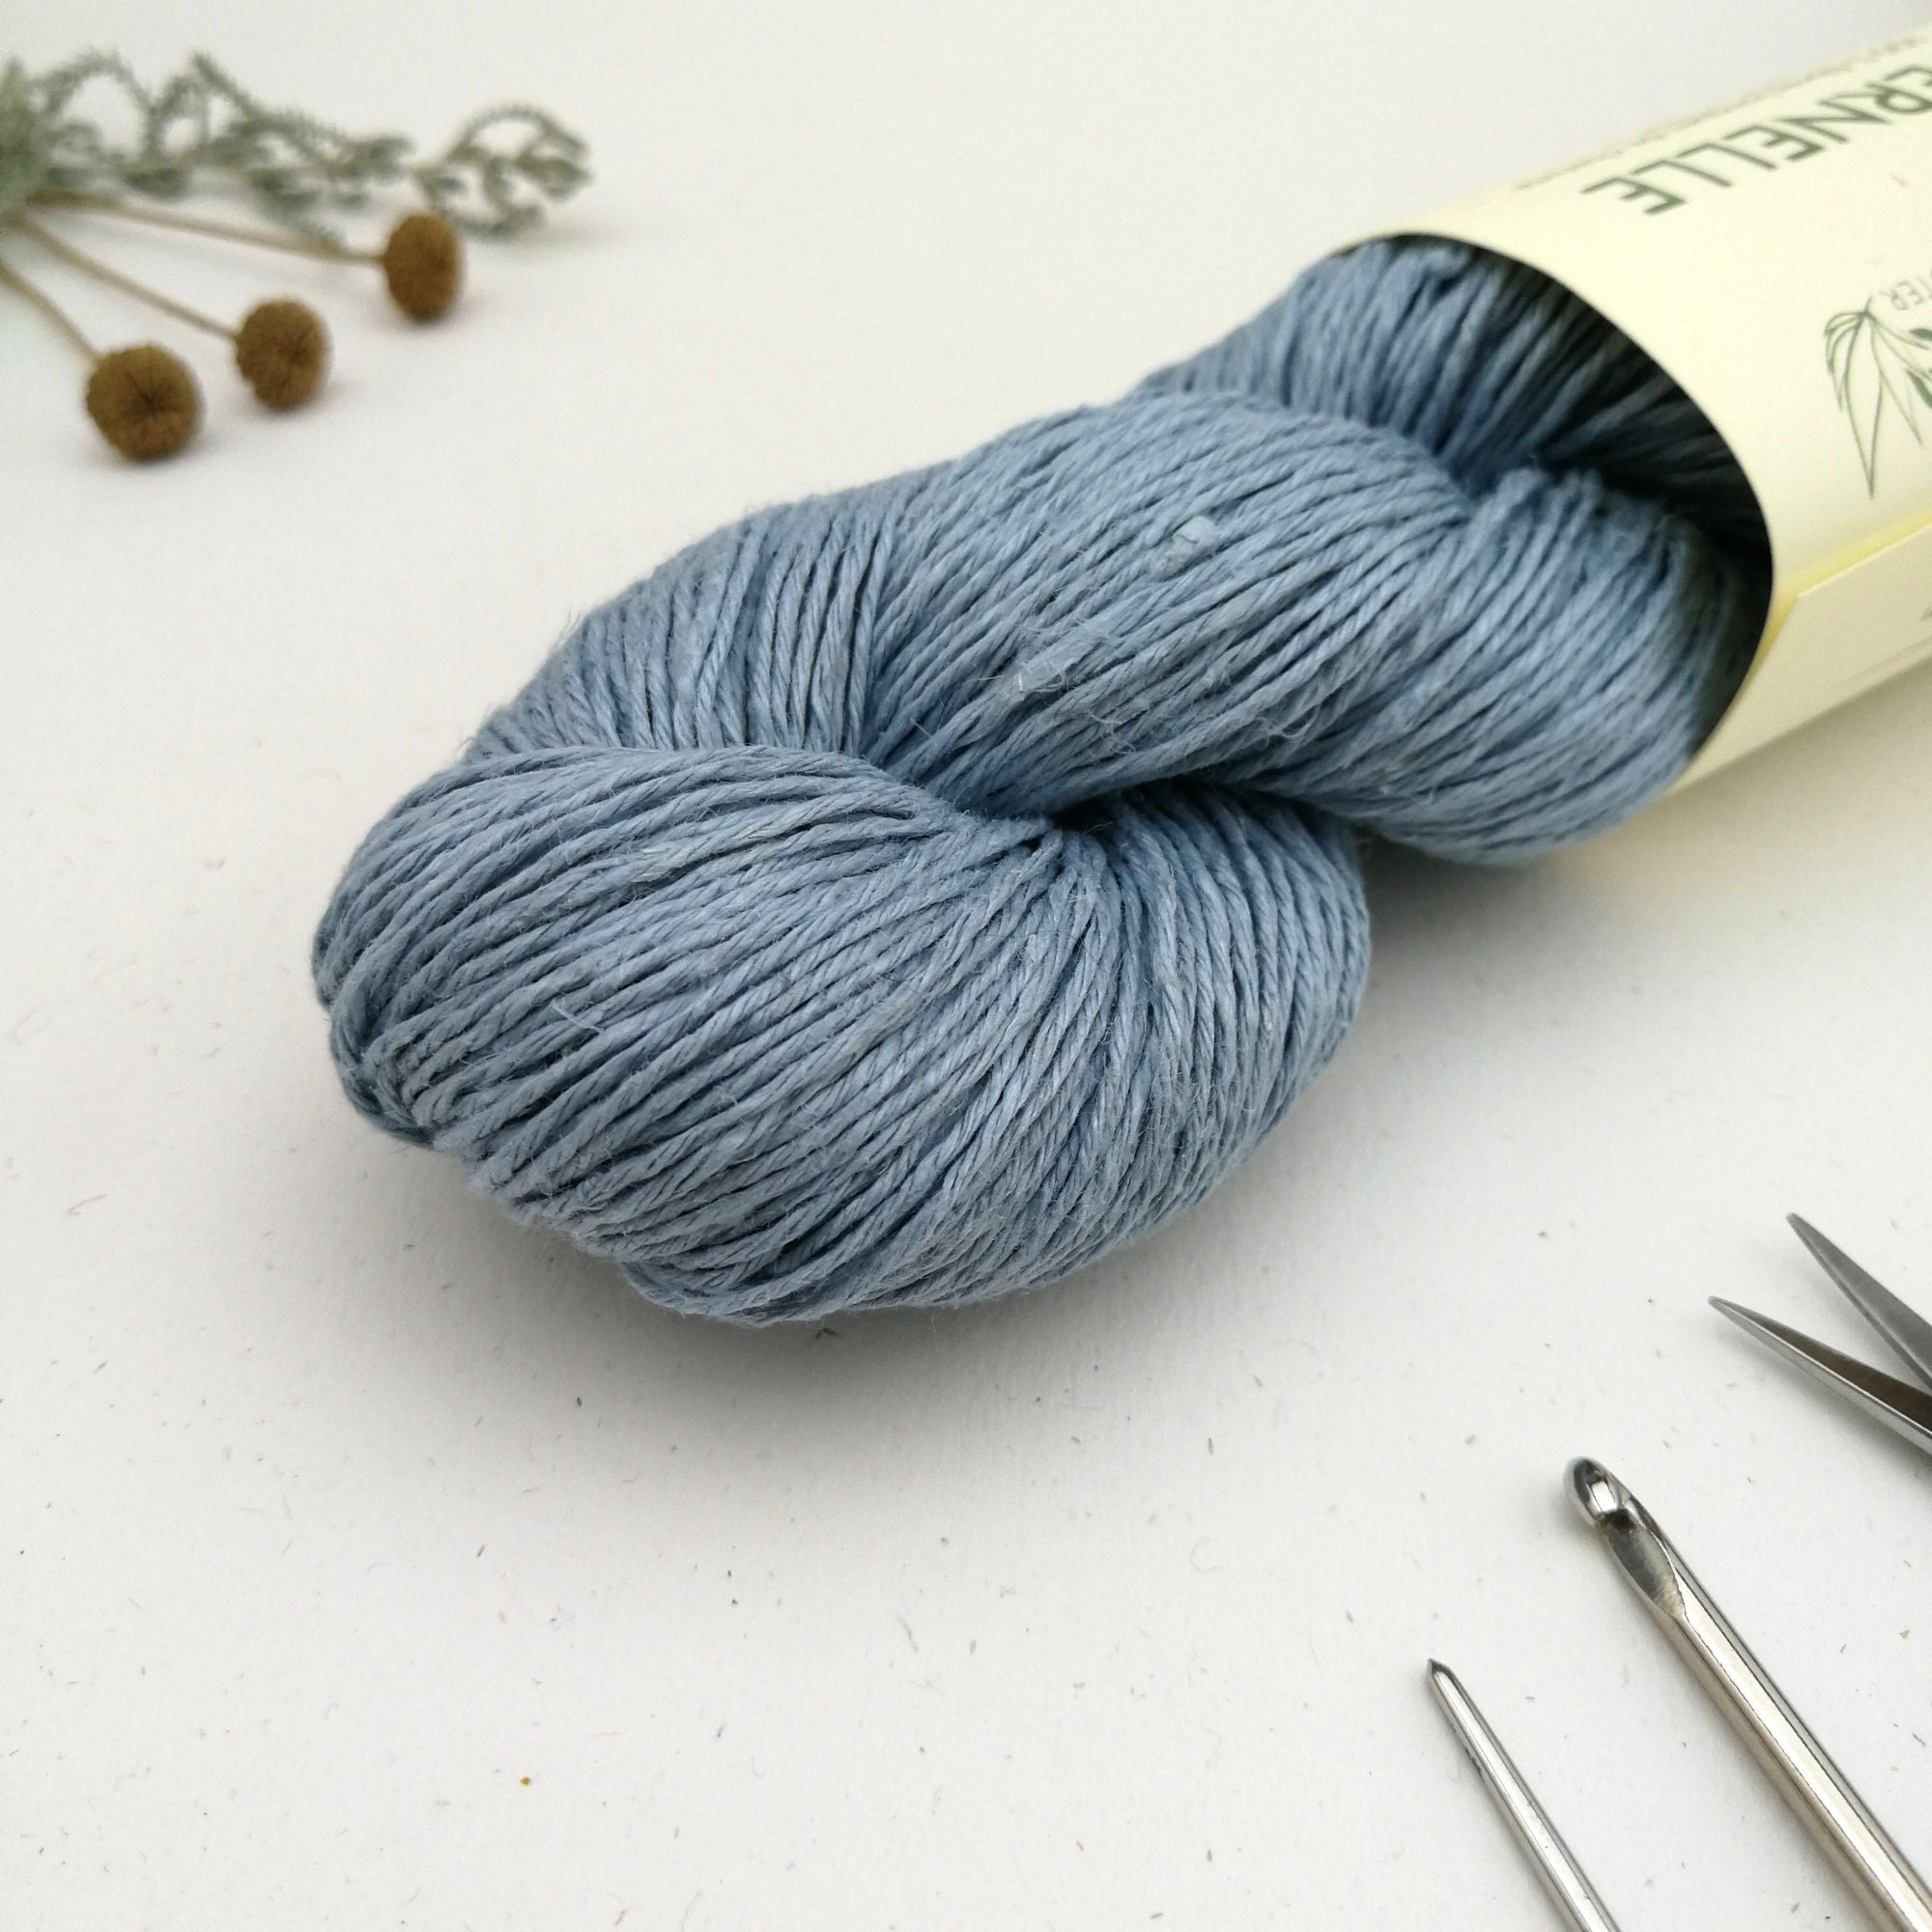 A skein of hemp yarn in bright baby blue is sat diagonally on a white background. A cream label is around its middle with green writing.